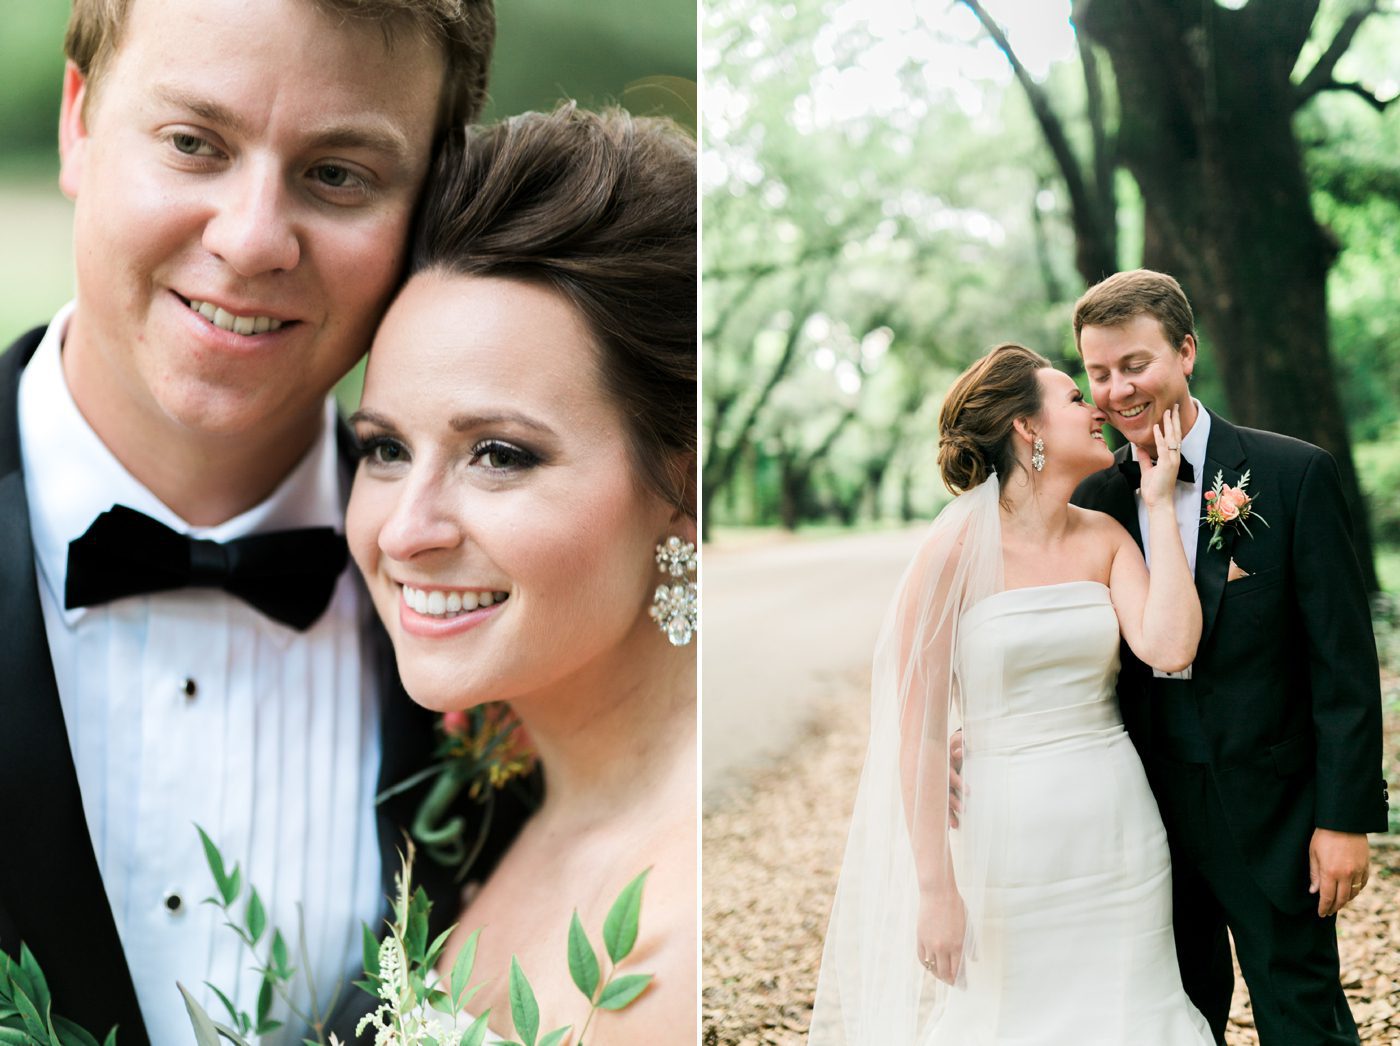 Bridal hair and makeup by The Studio, A Salon in Hartsville SC. Photo by Charleston wedding photographer Catherine Ann Photography